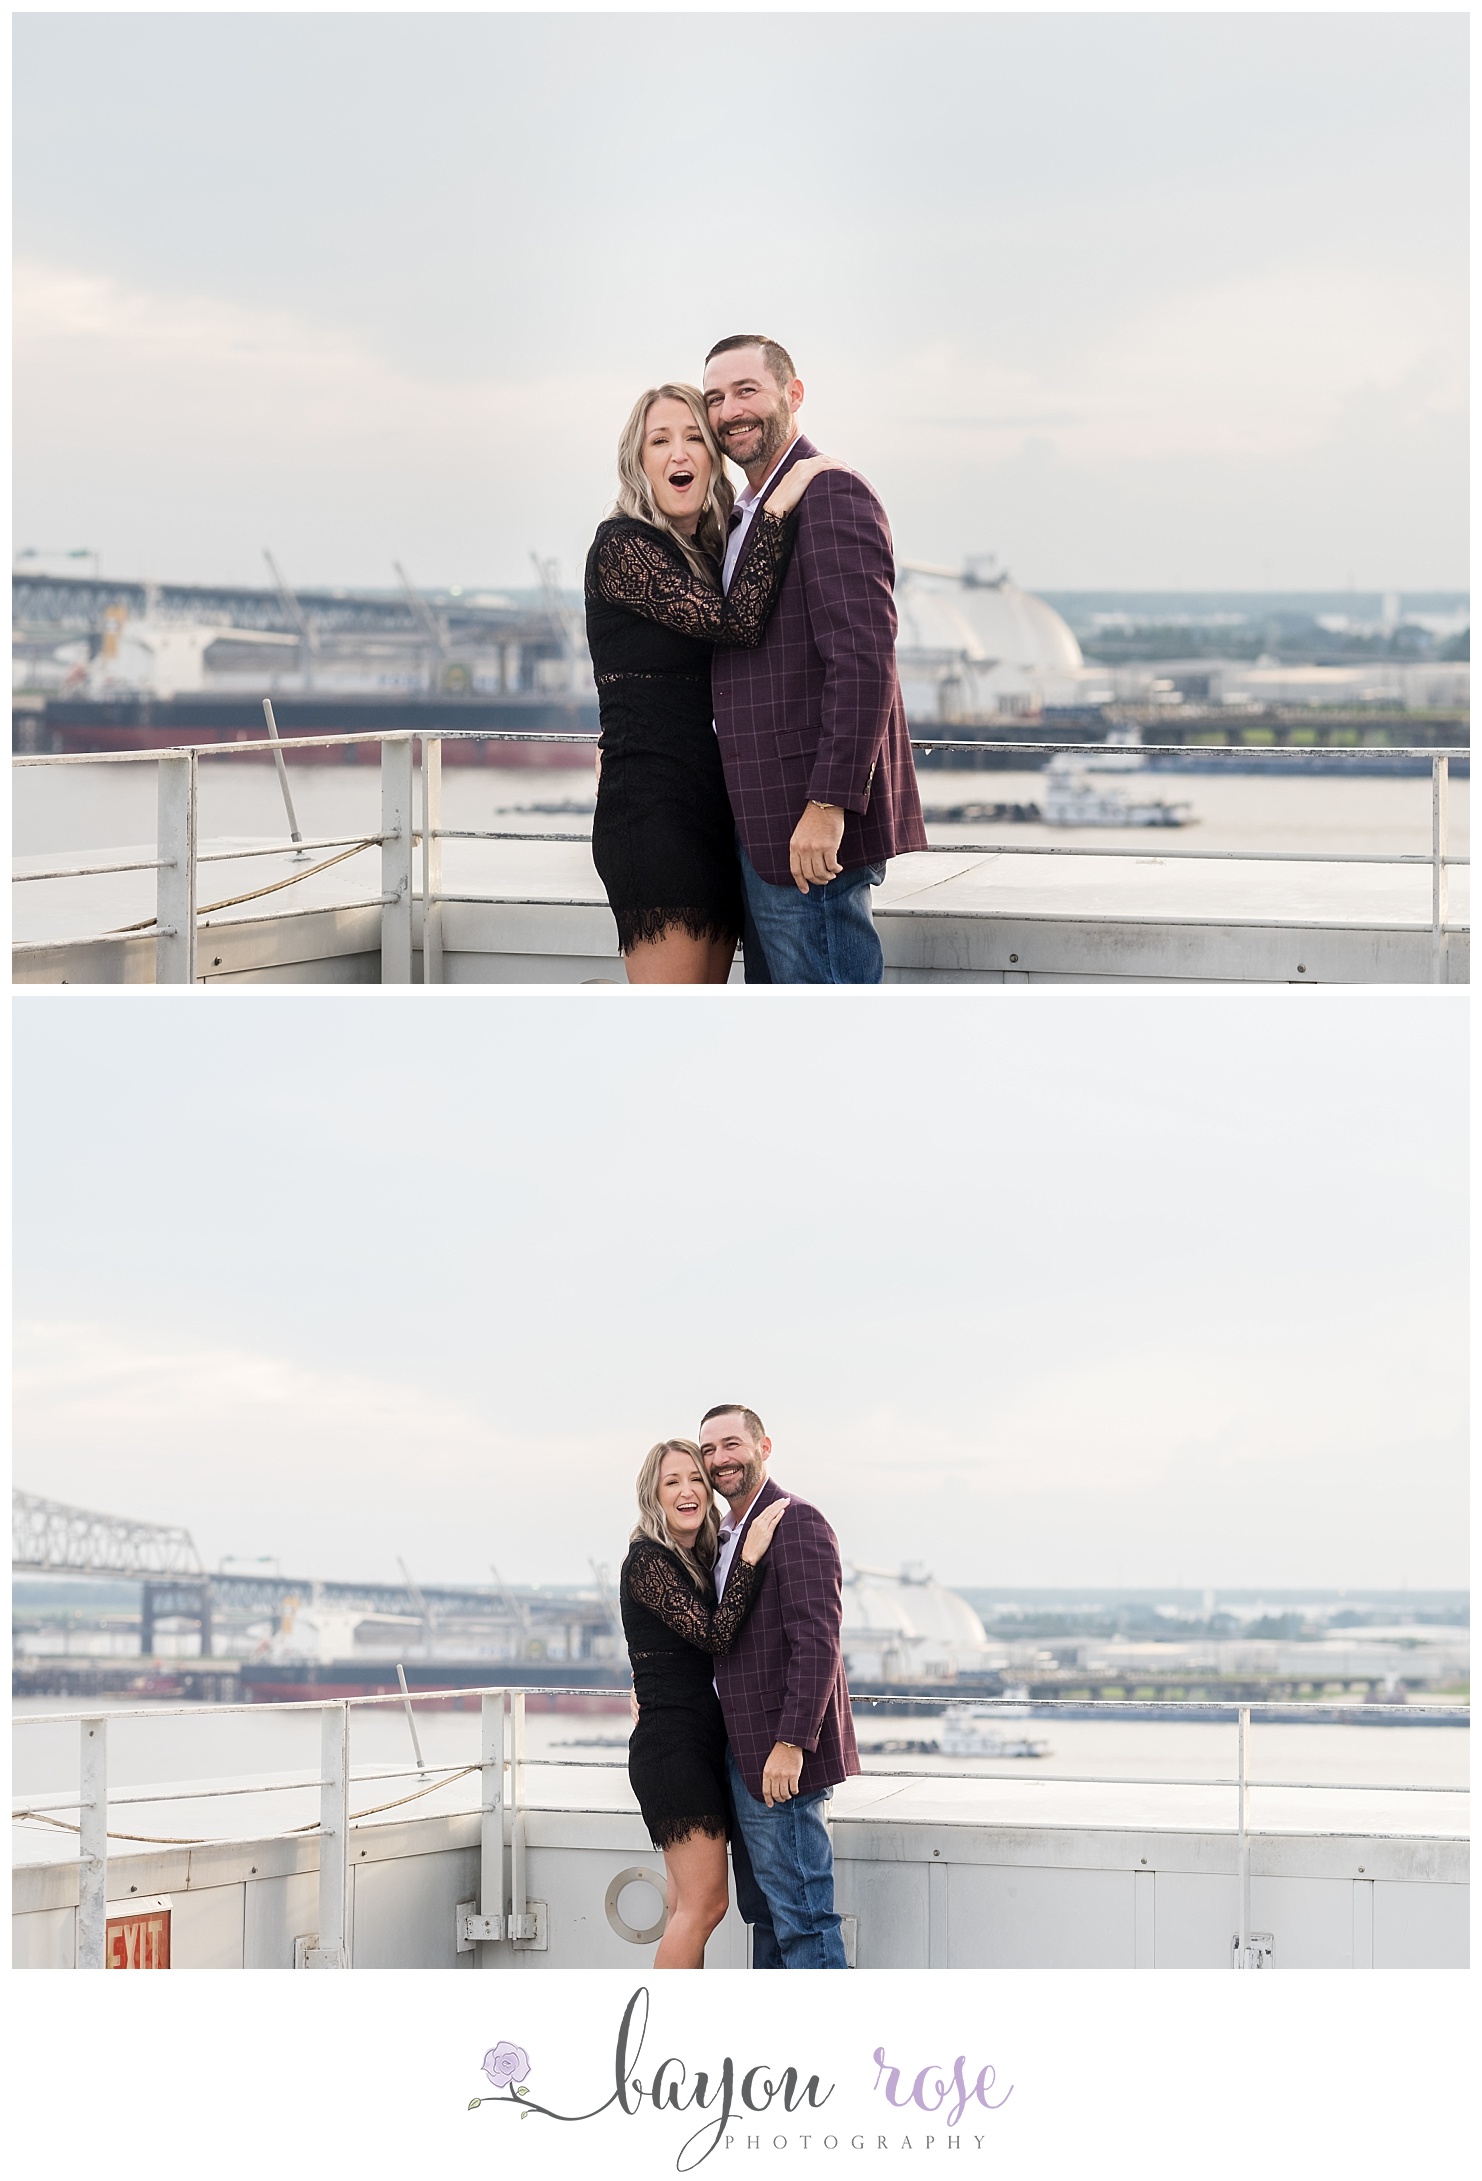 Woman showing surprise as she recognizes her proposal photographer